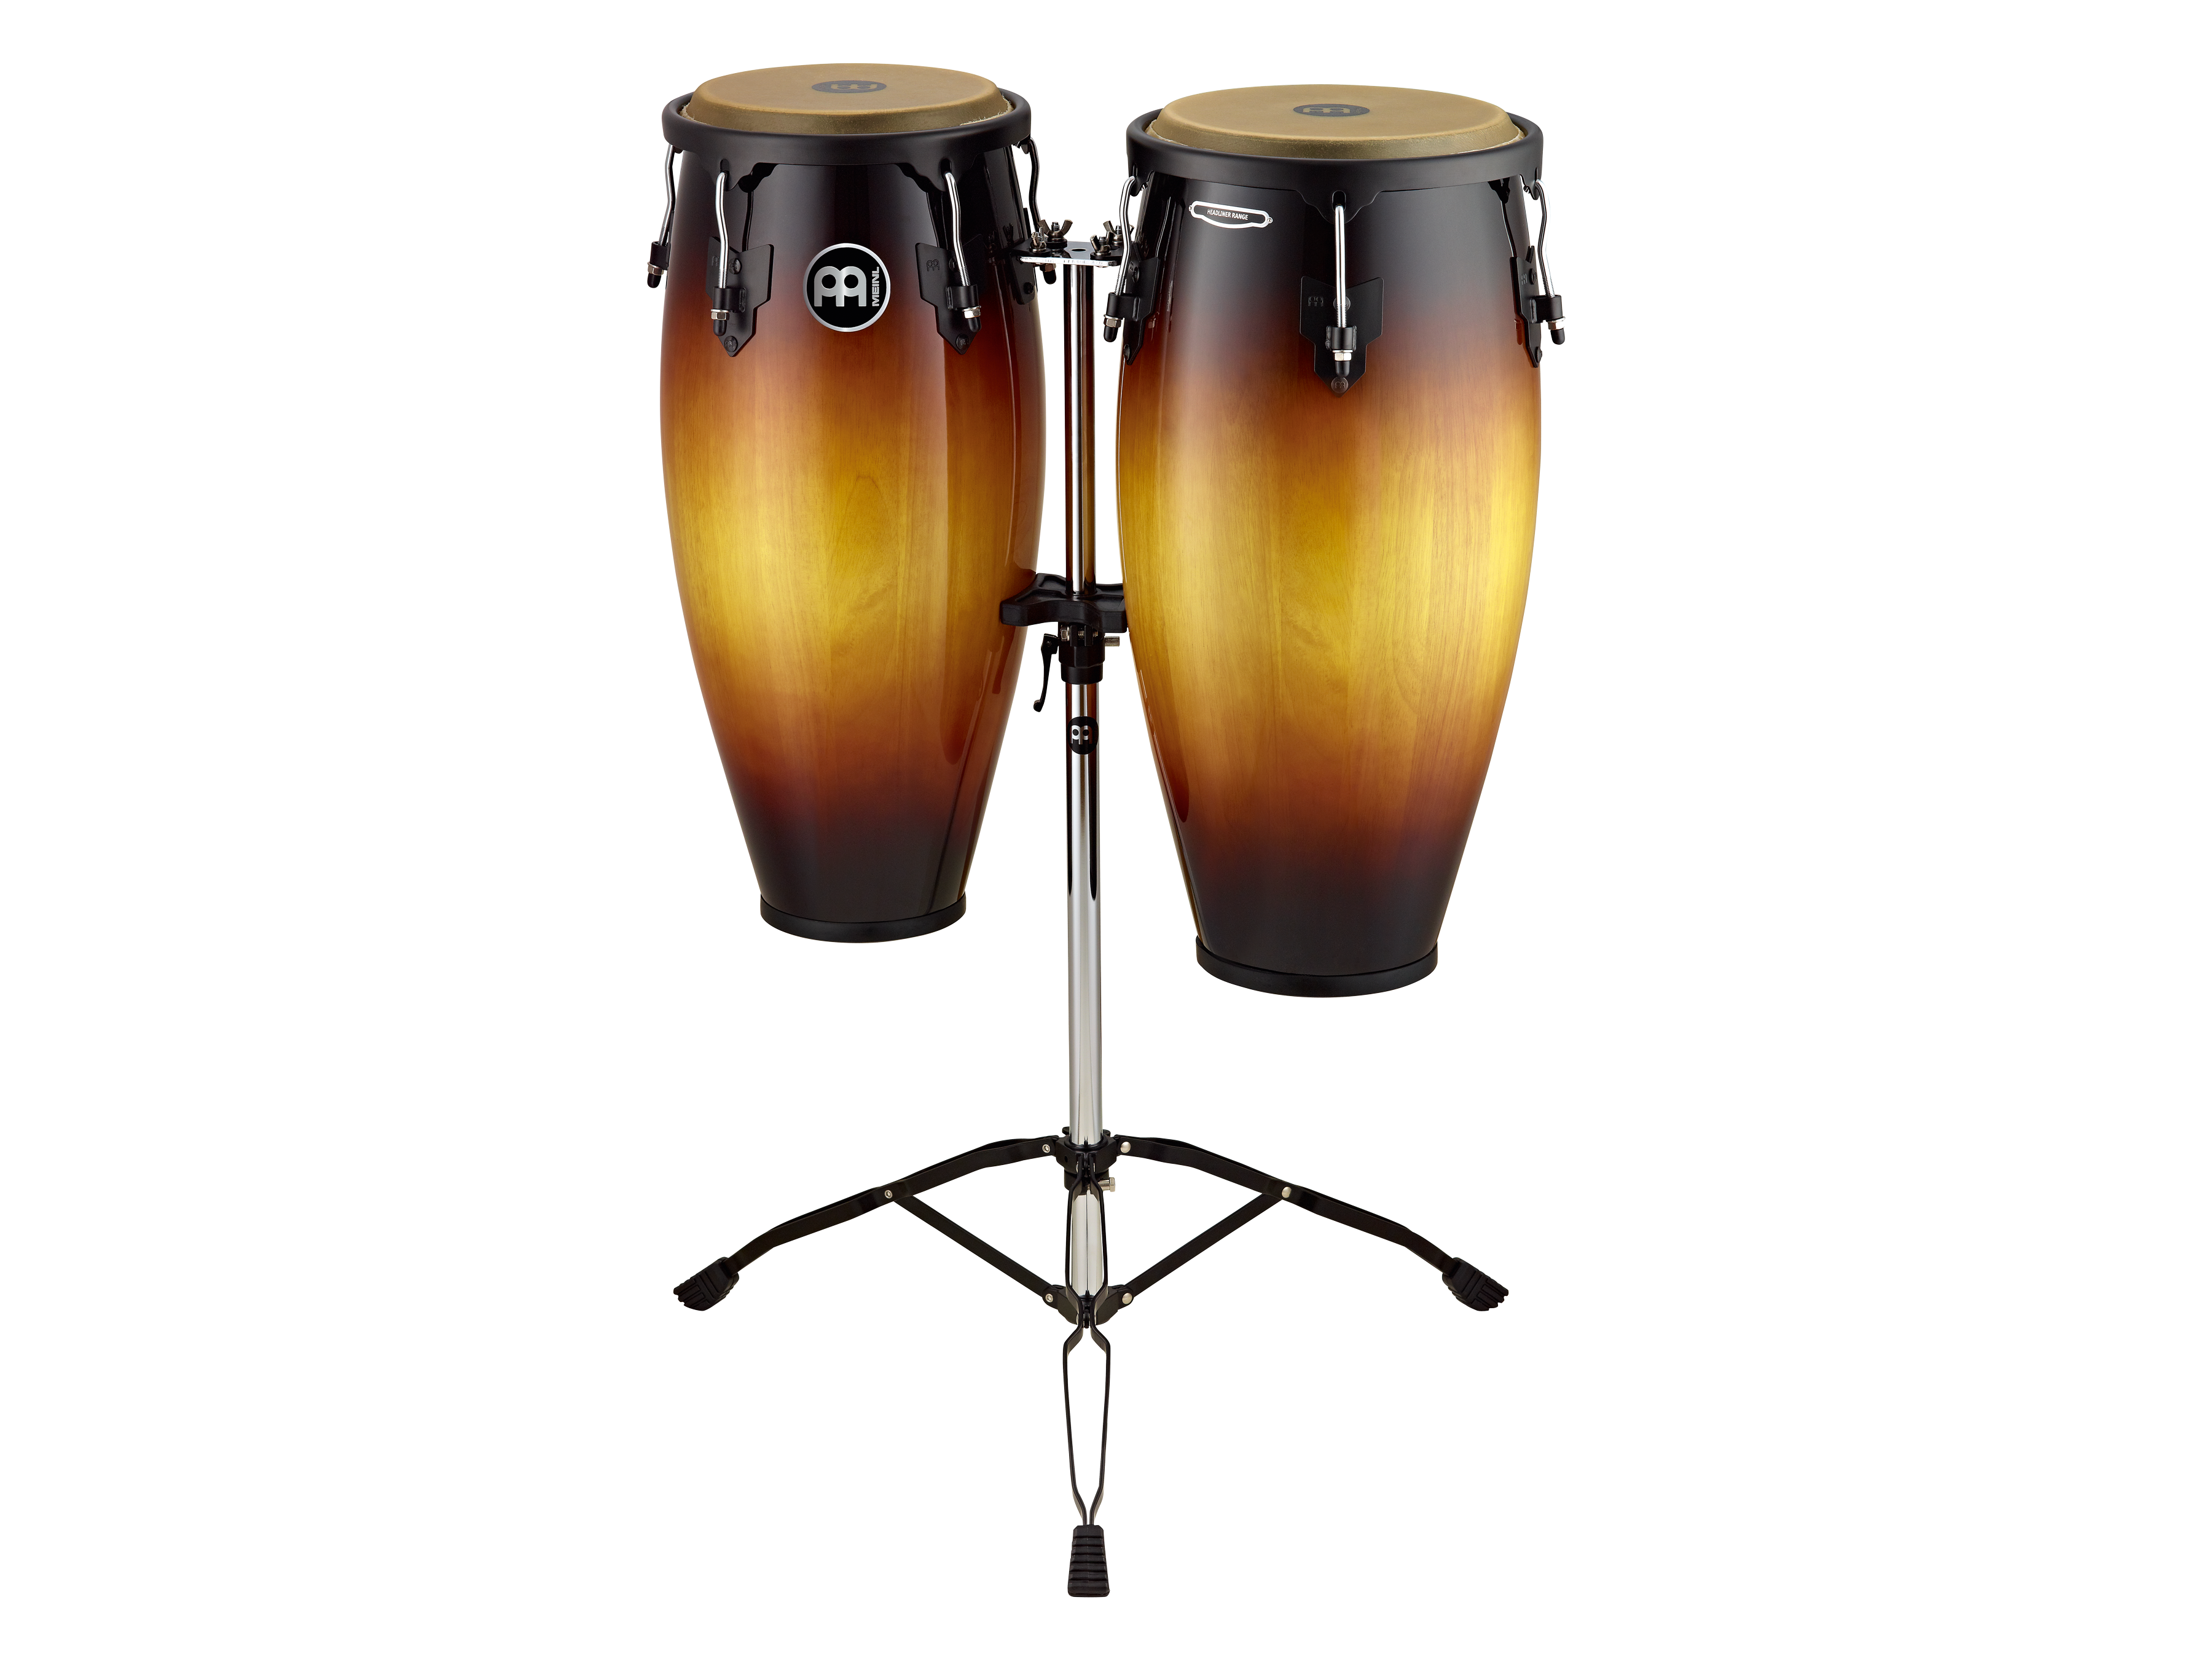 MEINL Percussion: Products